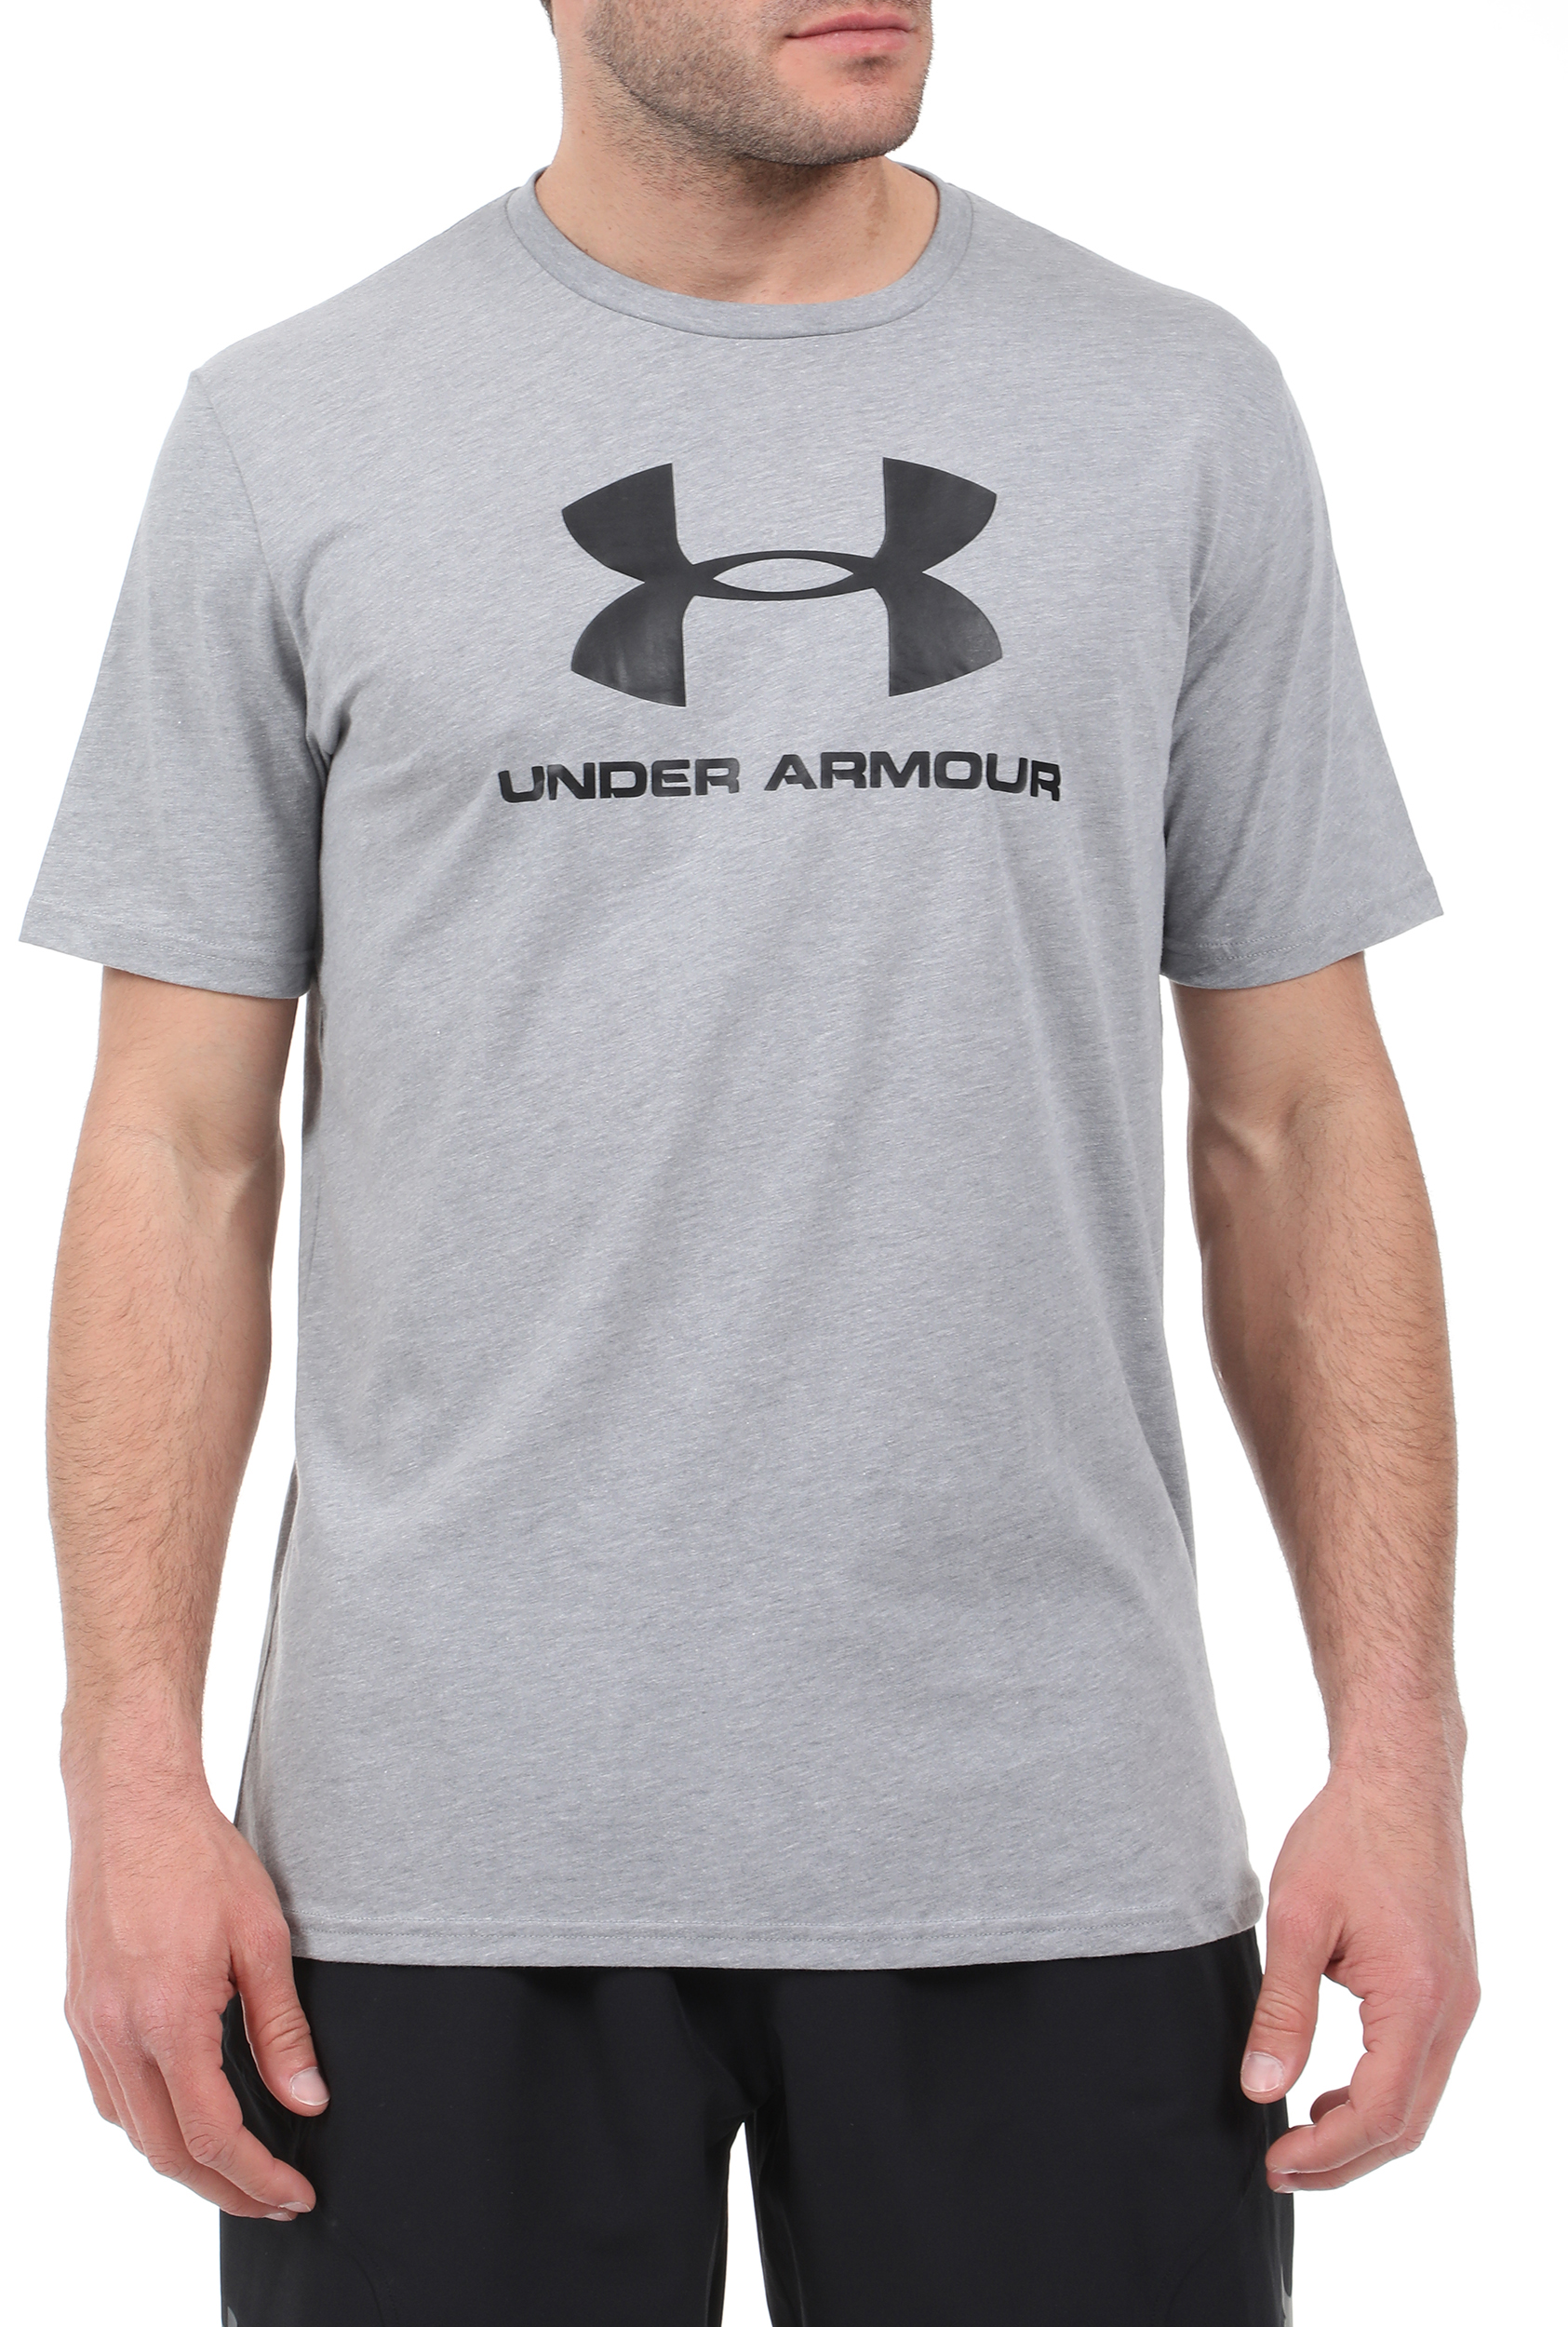 UNDER ARMOUR – Ανδρικό t-shirt UNDER ARMOUR SPORTSTYLE γκρι 1781843.0-G871